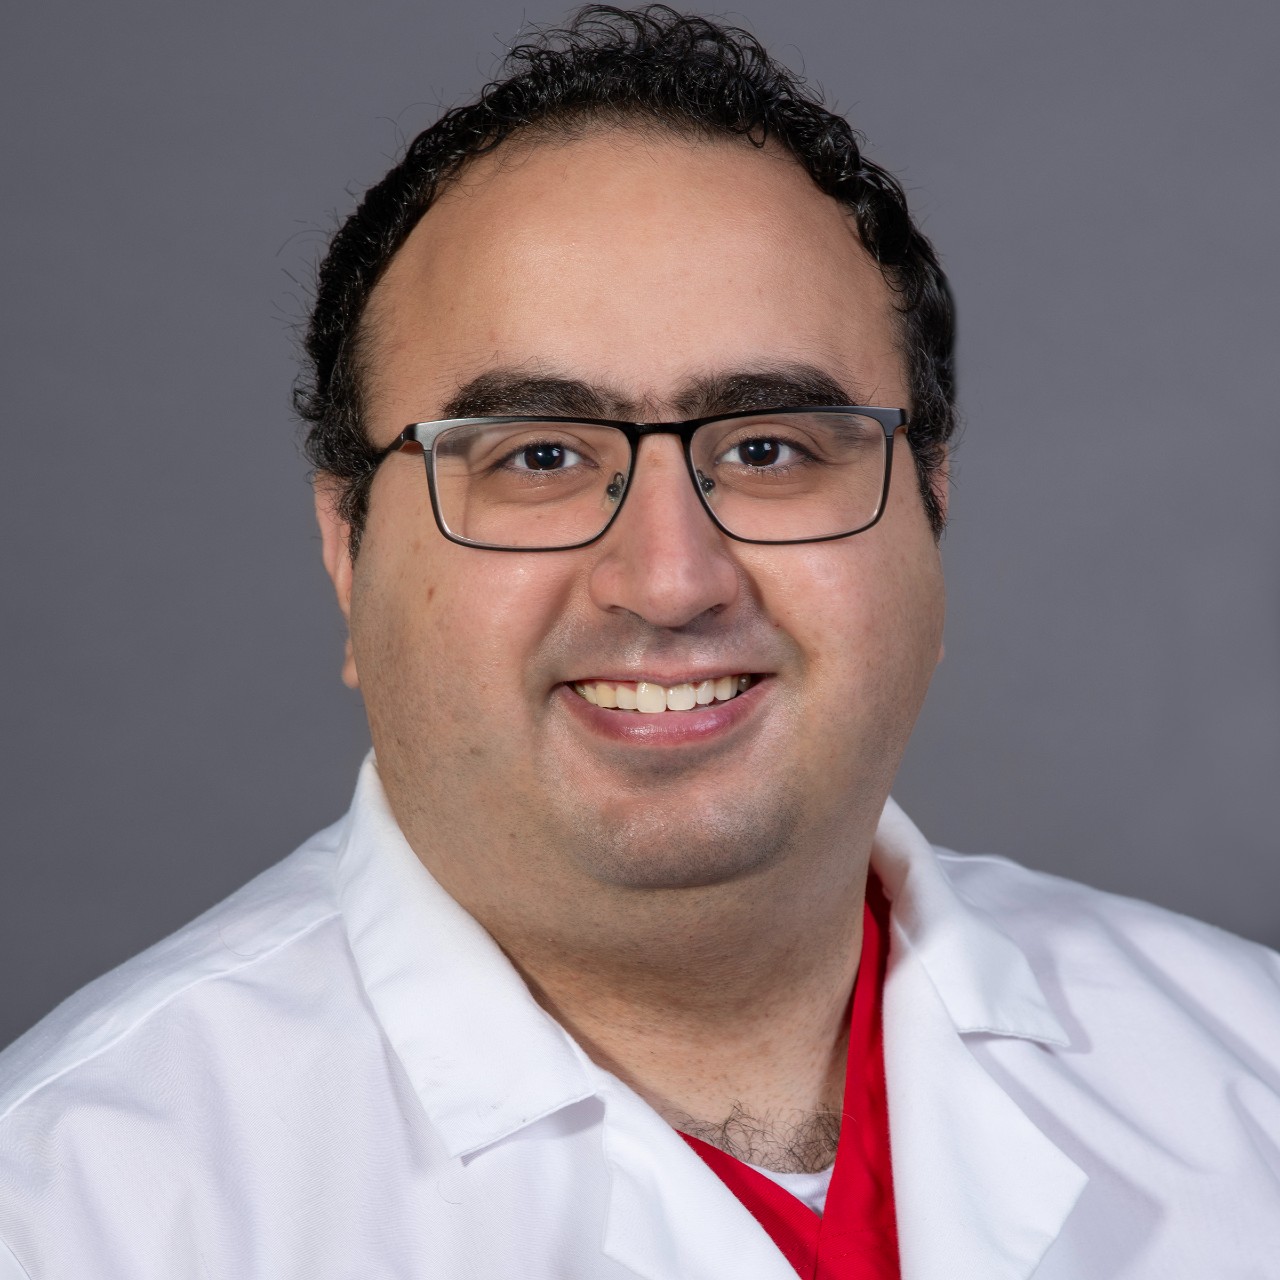 Moath A. Hamed, MD